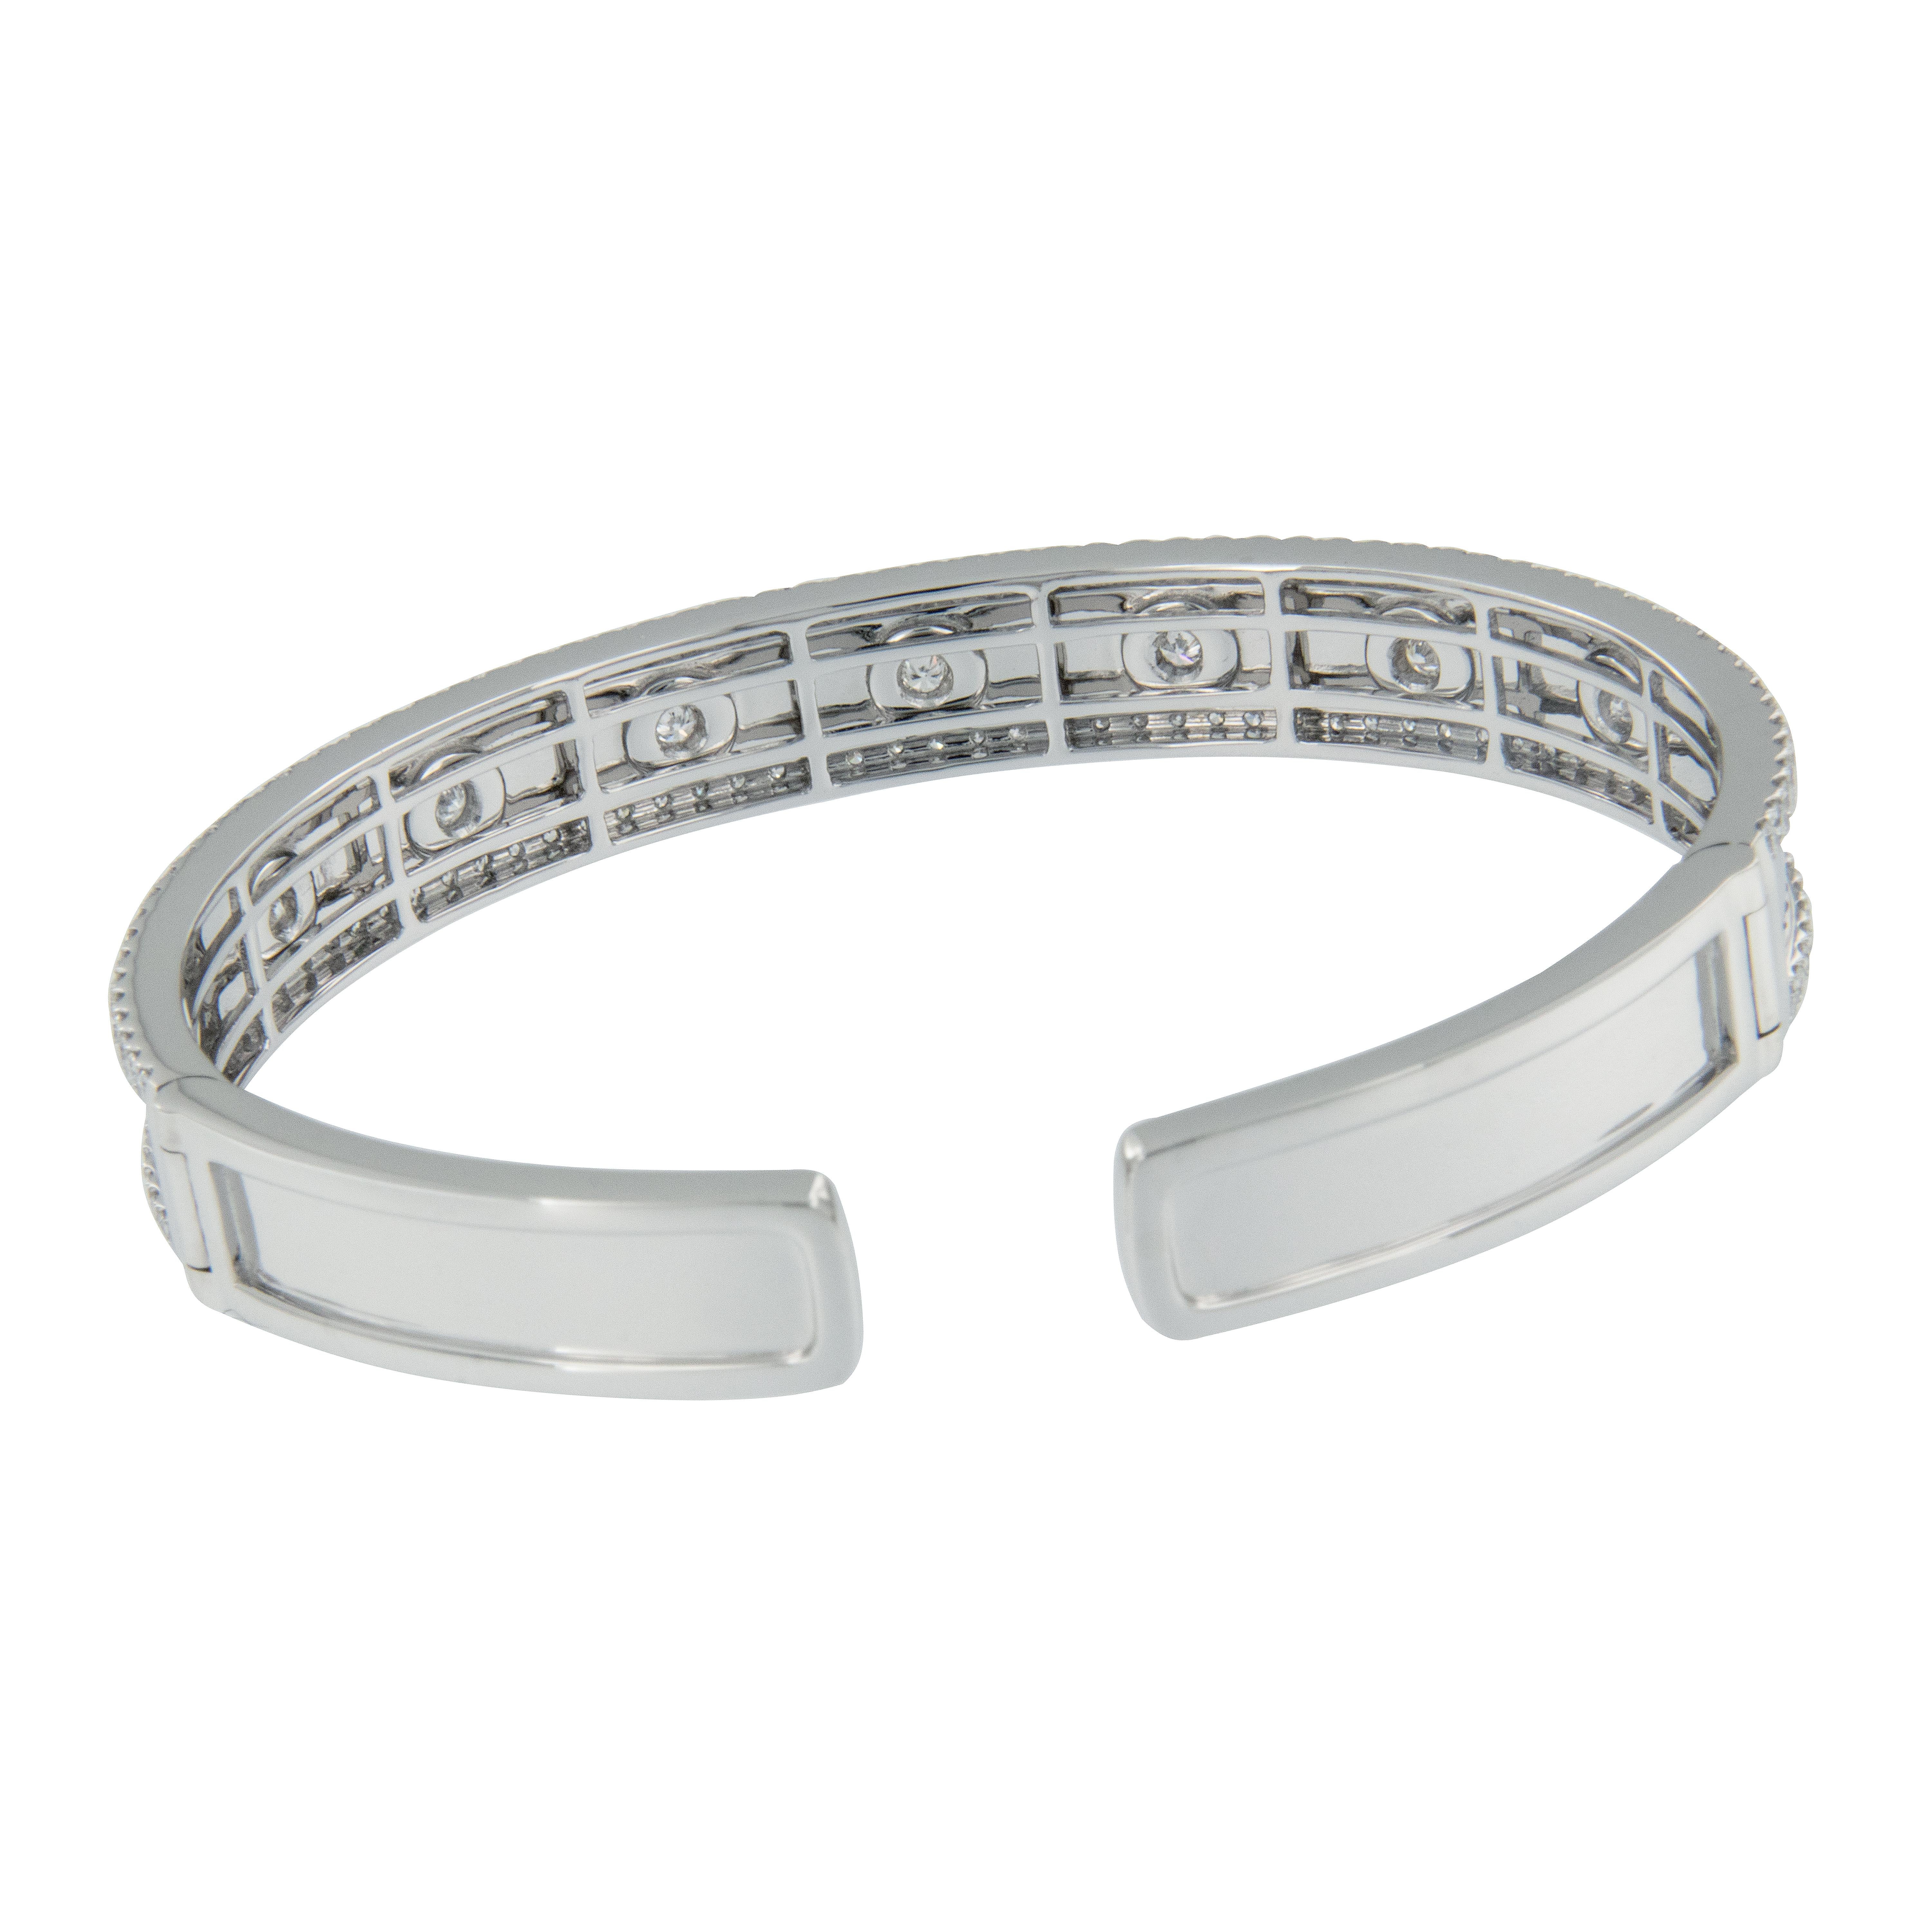 Beautifully executed 18 karat white gold bangle bracelet is perfectly accented with 2.20 Cttw VS clarity, F-G color diamonds expertly burnished set for a smooth look and feel, perfectly 